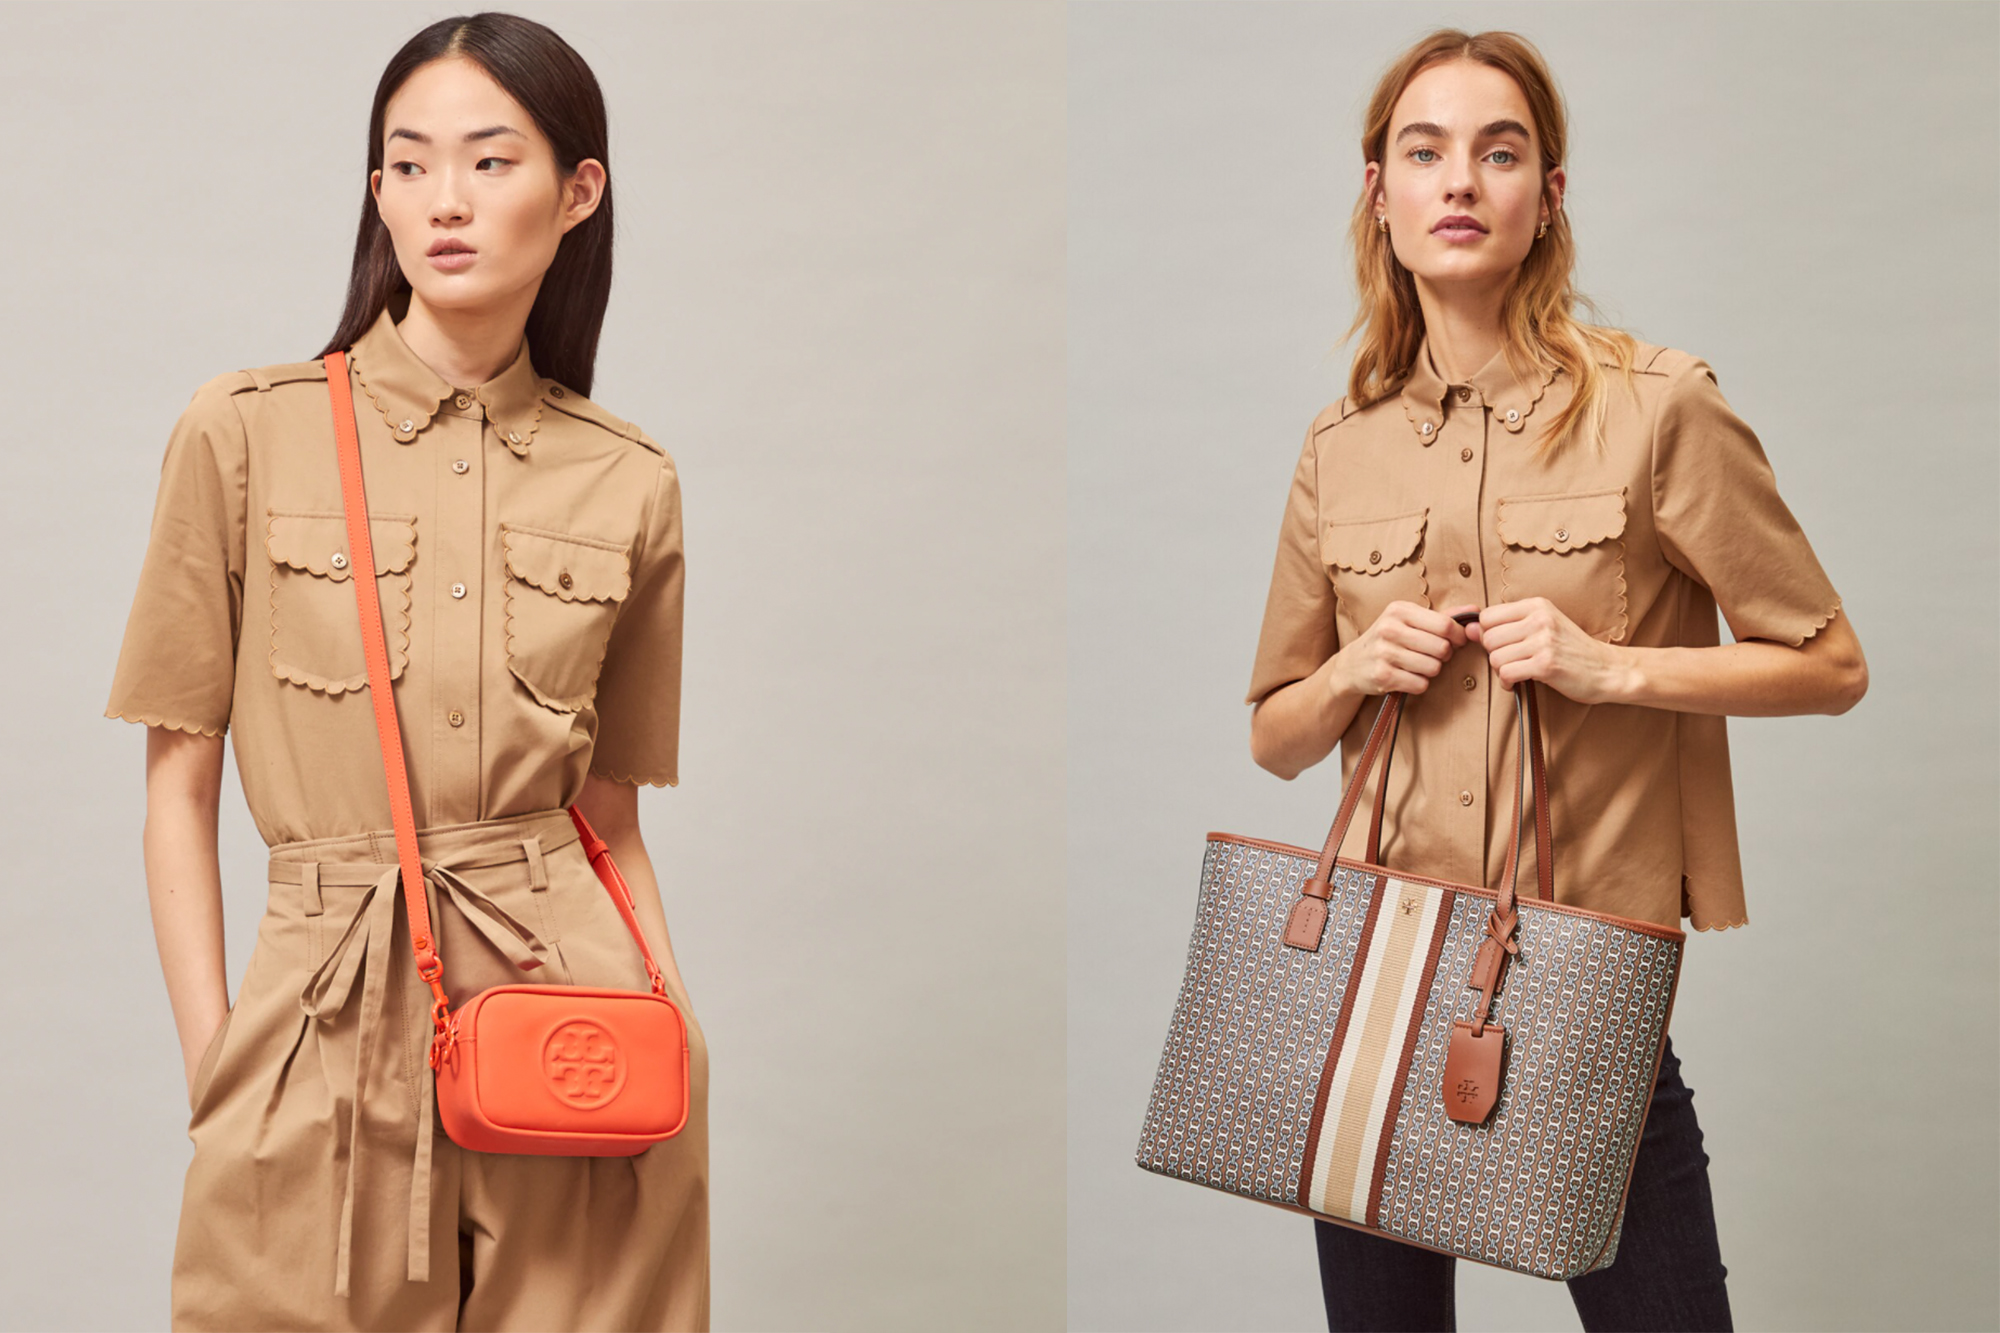 Tory Burch Sale: Our Favorite Just Added Items Up to 40% Off